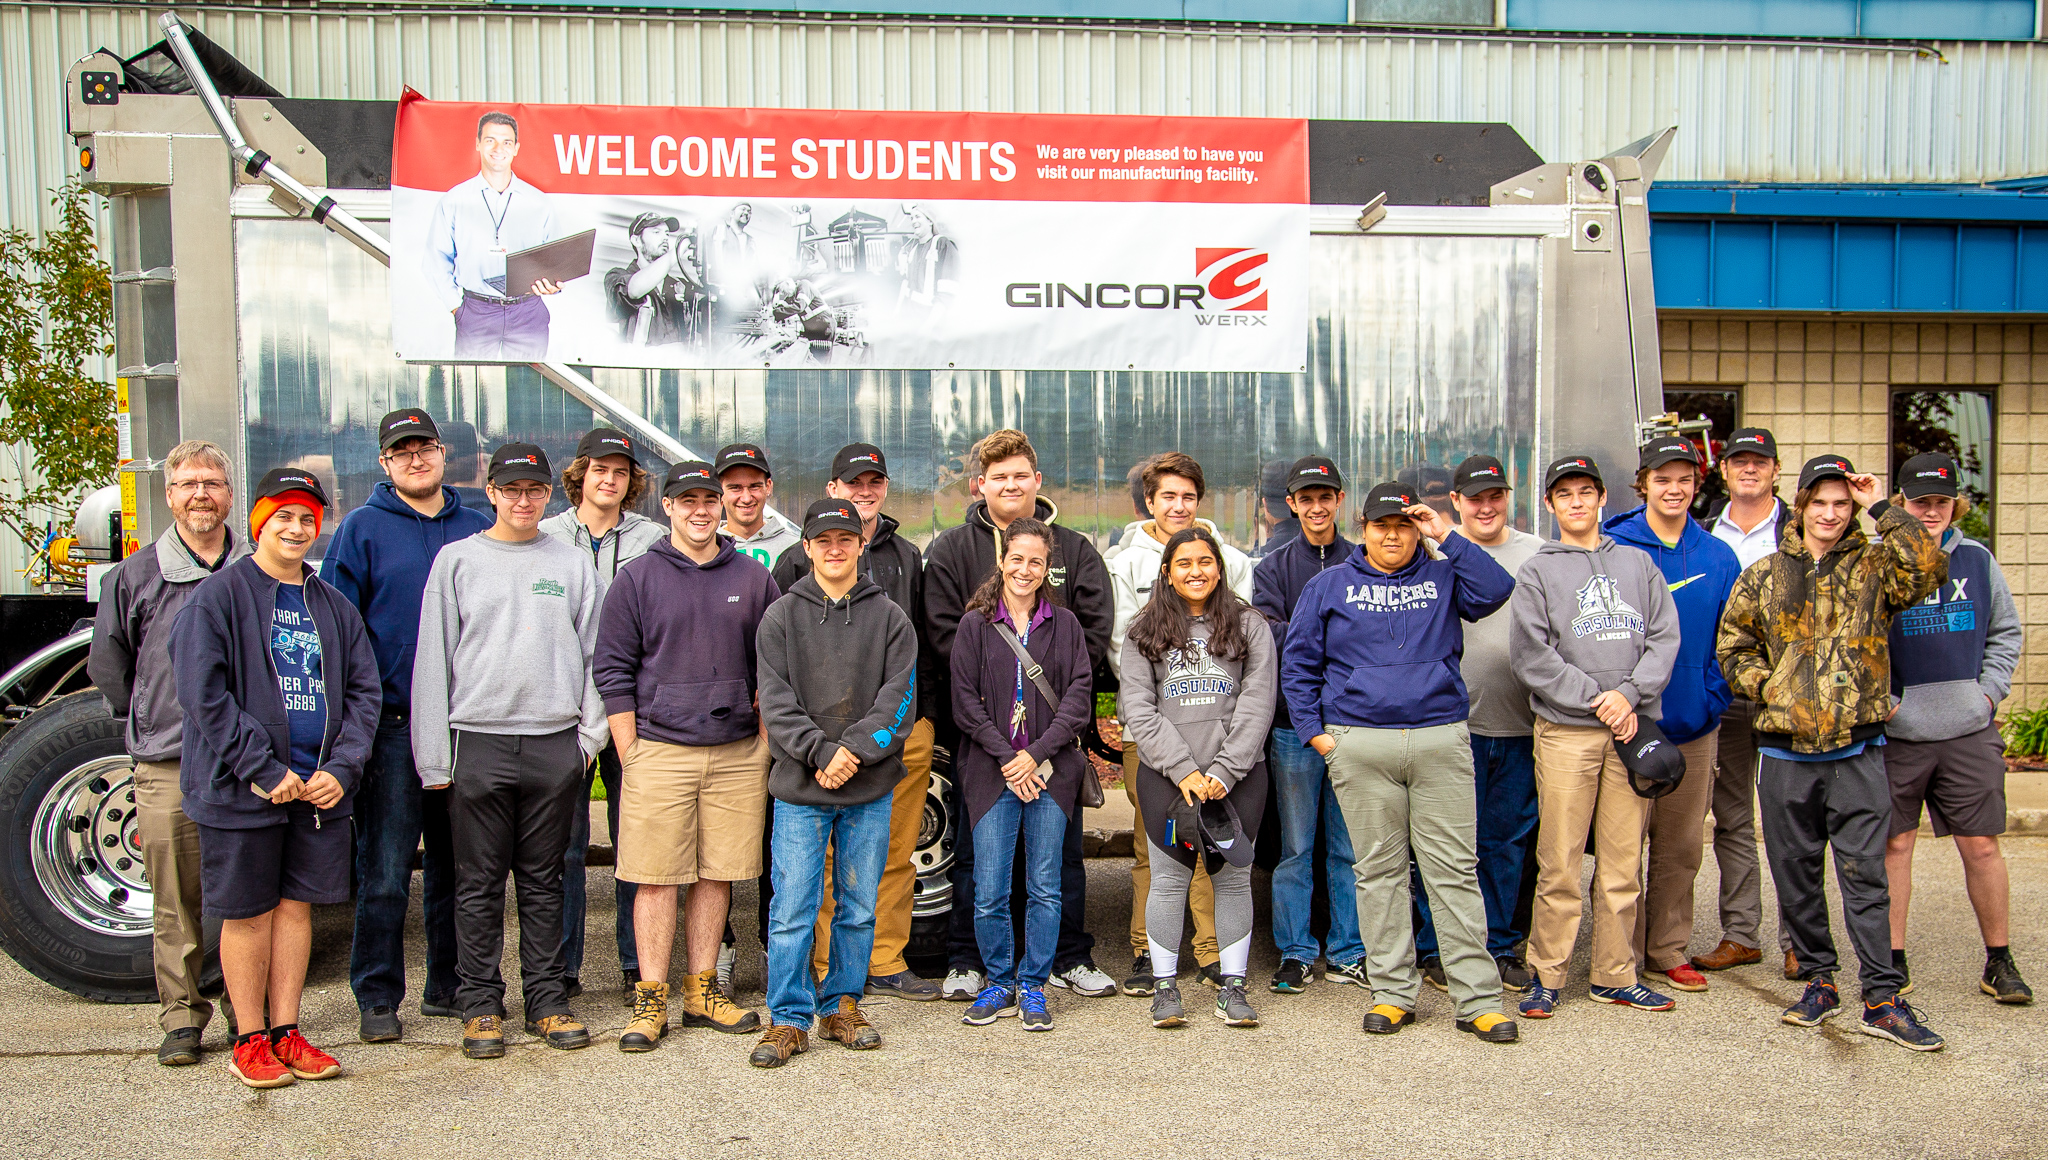 A group of Chatham-Kent students visiting Gincor Werx, a trailer manufacturer located in Blenheim, for an insider tour